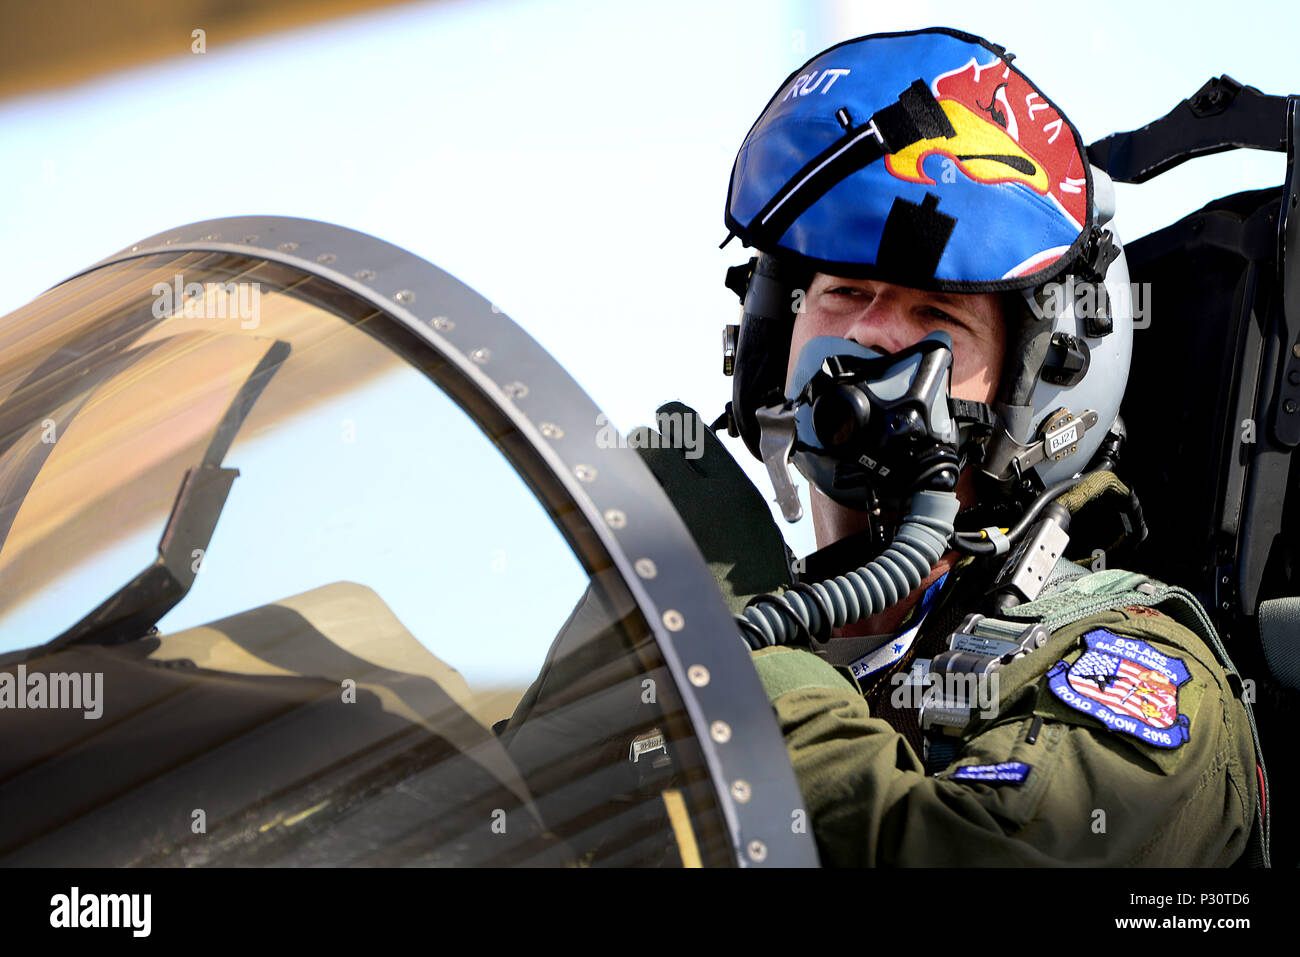 U.S. Air Force Major Oliver Roe, 492nd Fighter Squadron pilot, gets ready for a sortie in preparation for exercise Red Flag 16-4 at Nellis Air Force Base, Nevada, Aug 12. Red Flag is the U.S. Air Force’s premier air-to-air combat training exercise and one of a series of advanced training programs that is administered by the U.S. Air Force Warfare Center and executed through the 414th Combat Training Squadron. (U.S. Air Force photo/ Tech. Sgt. Matthew Plew) Stock Photo